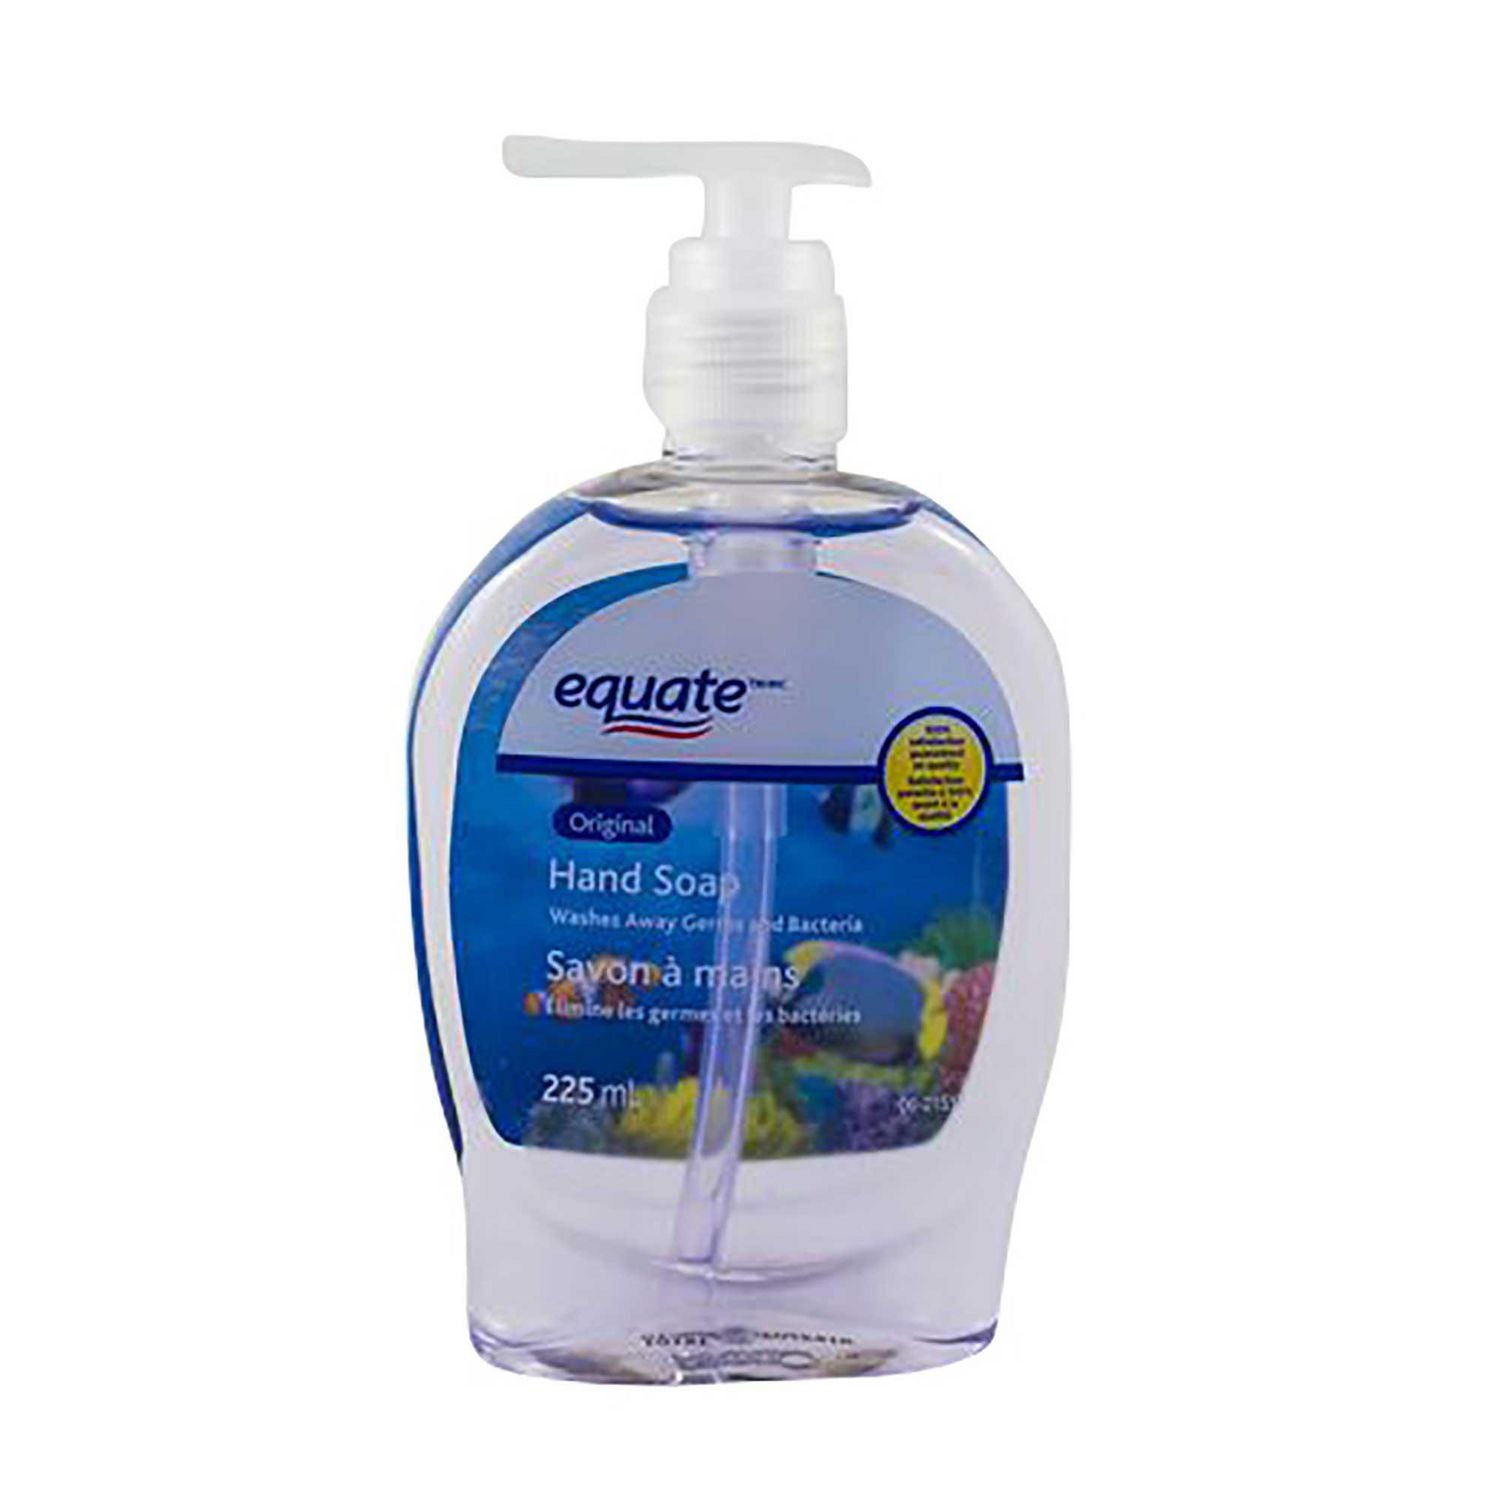 HAND SOAP - 225ml - equate